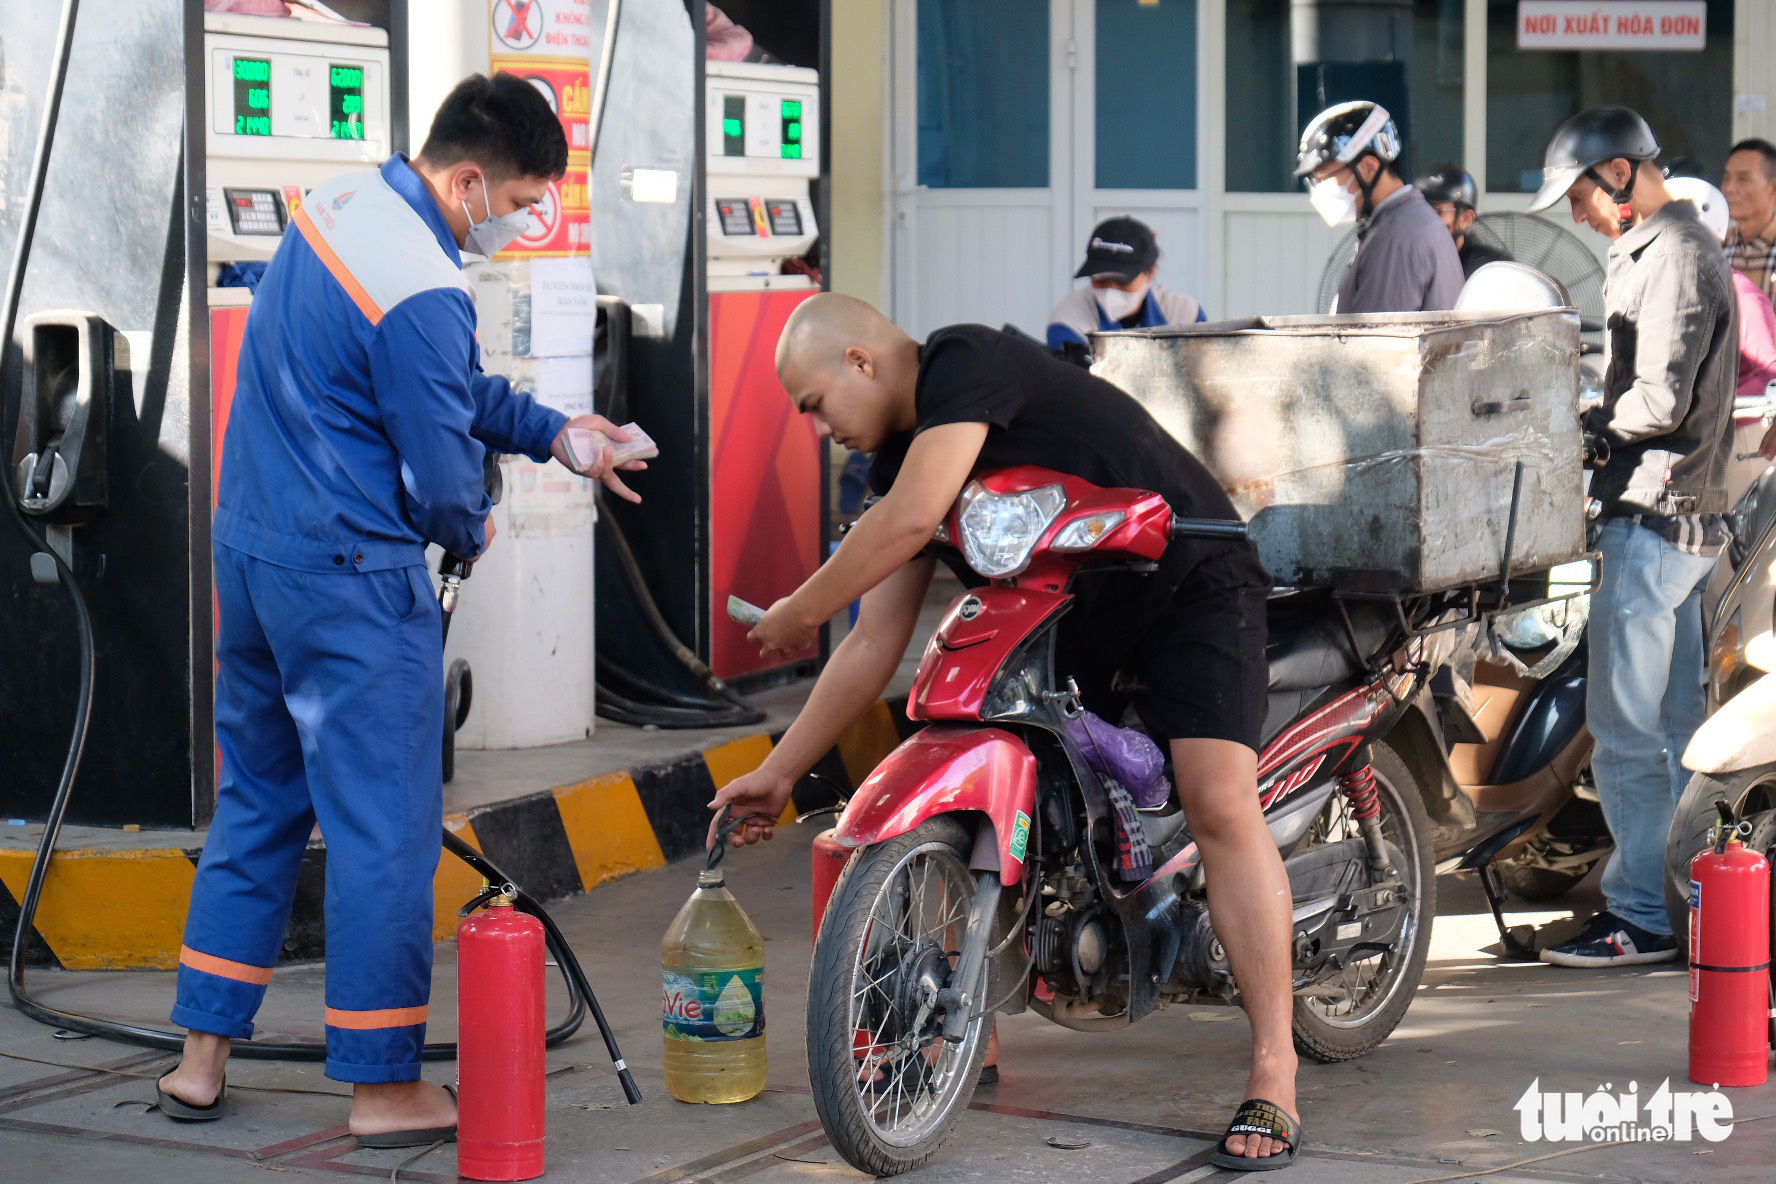 A man buys gasoline at a filling station in Hanoi, October 11, 2022. Photo: Nguyen Bao / Tuoi Tre